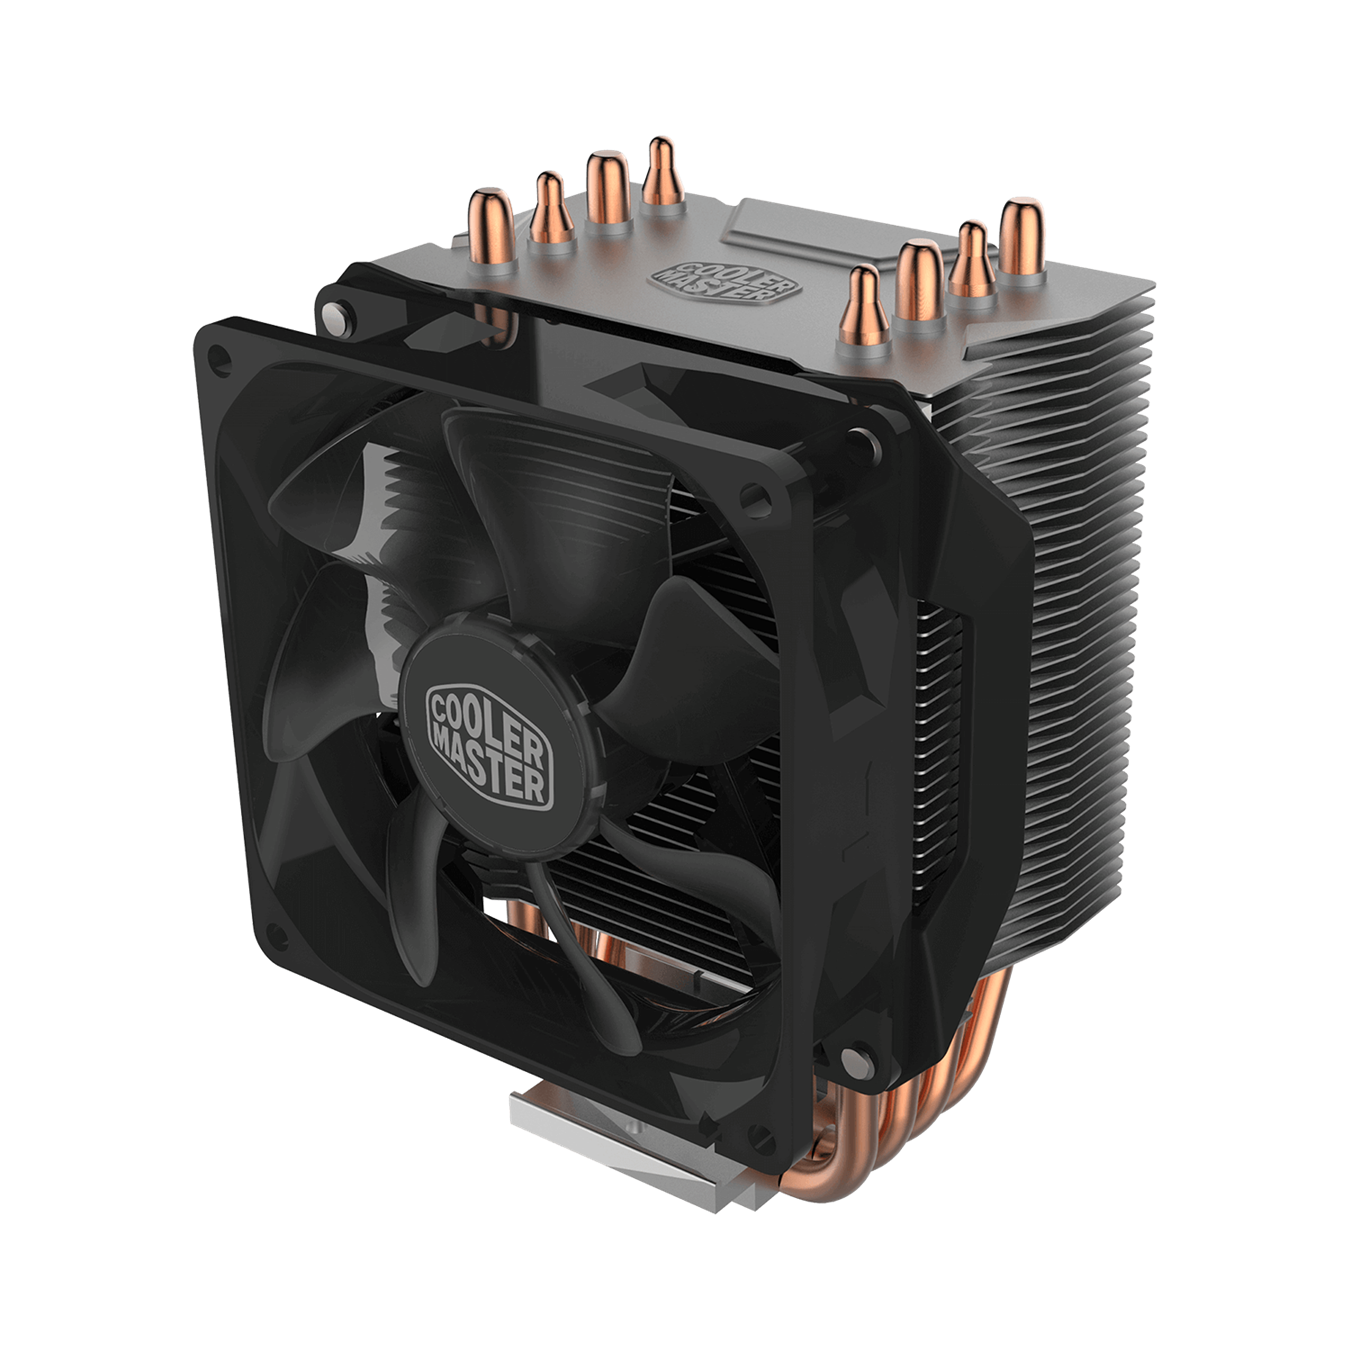 The Hyper H412R is a small, low-profile, quiet cooler designed to fit in a limited space. With its outstanding performance in its class, it is a perfect solution for small form factor cases.